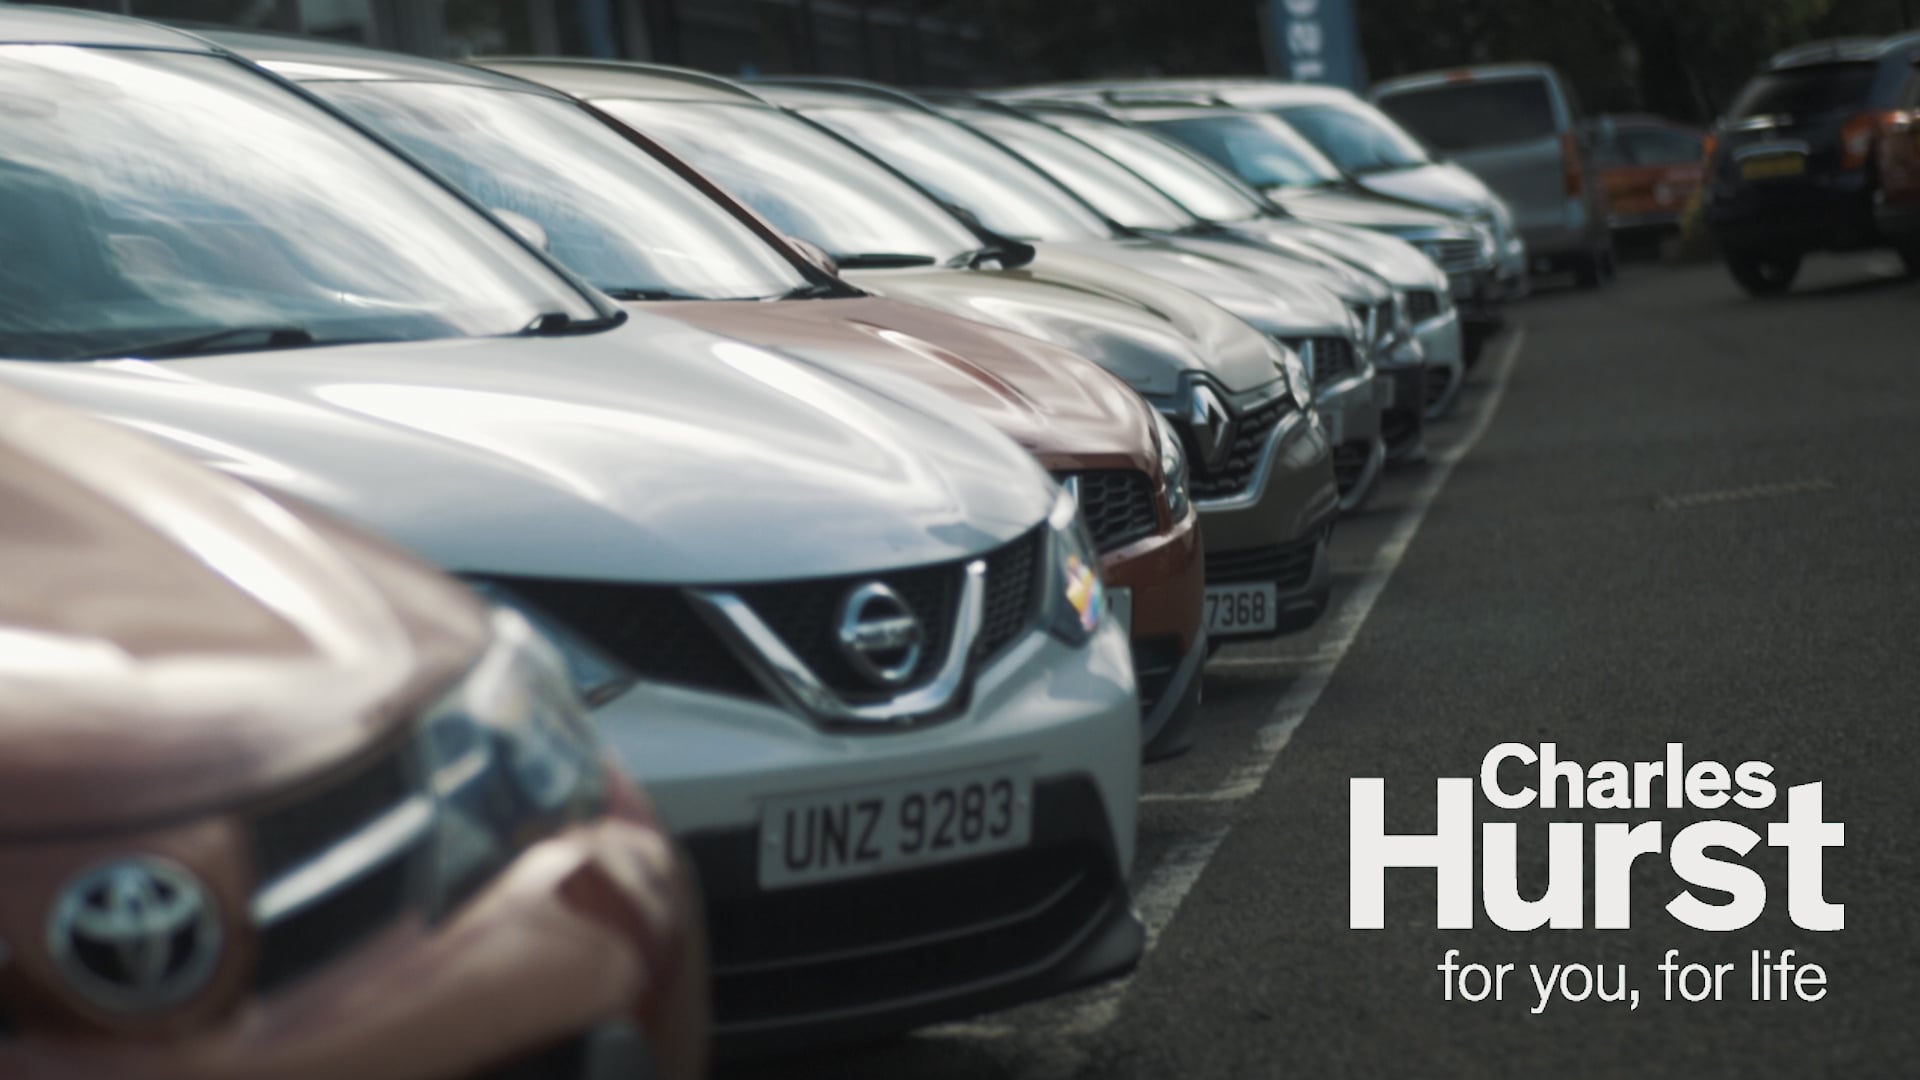 CHARLES HURST | LARGEST NEW & USED VEHICLE SUPPLIER IN NORTHERN IRELAND